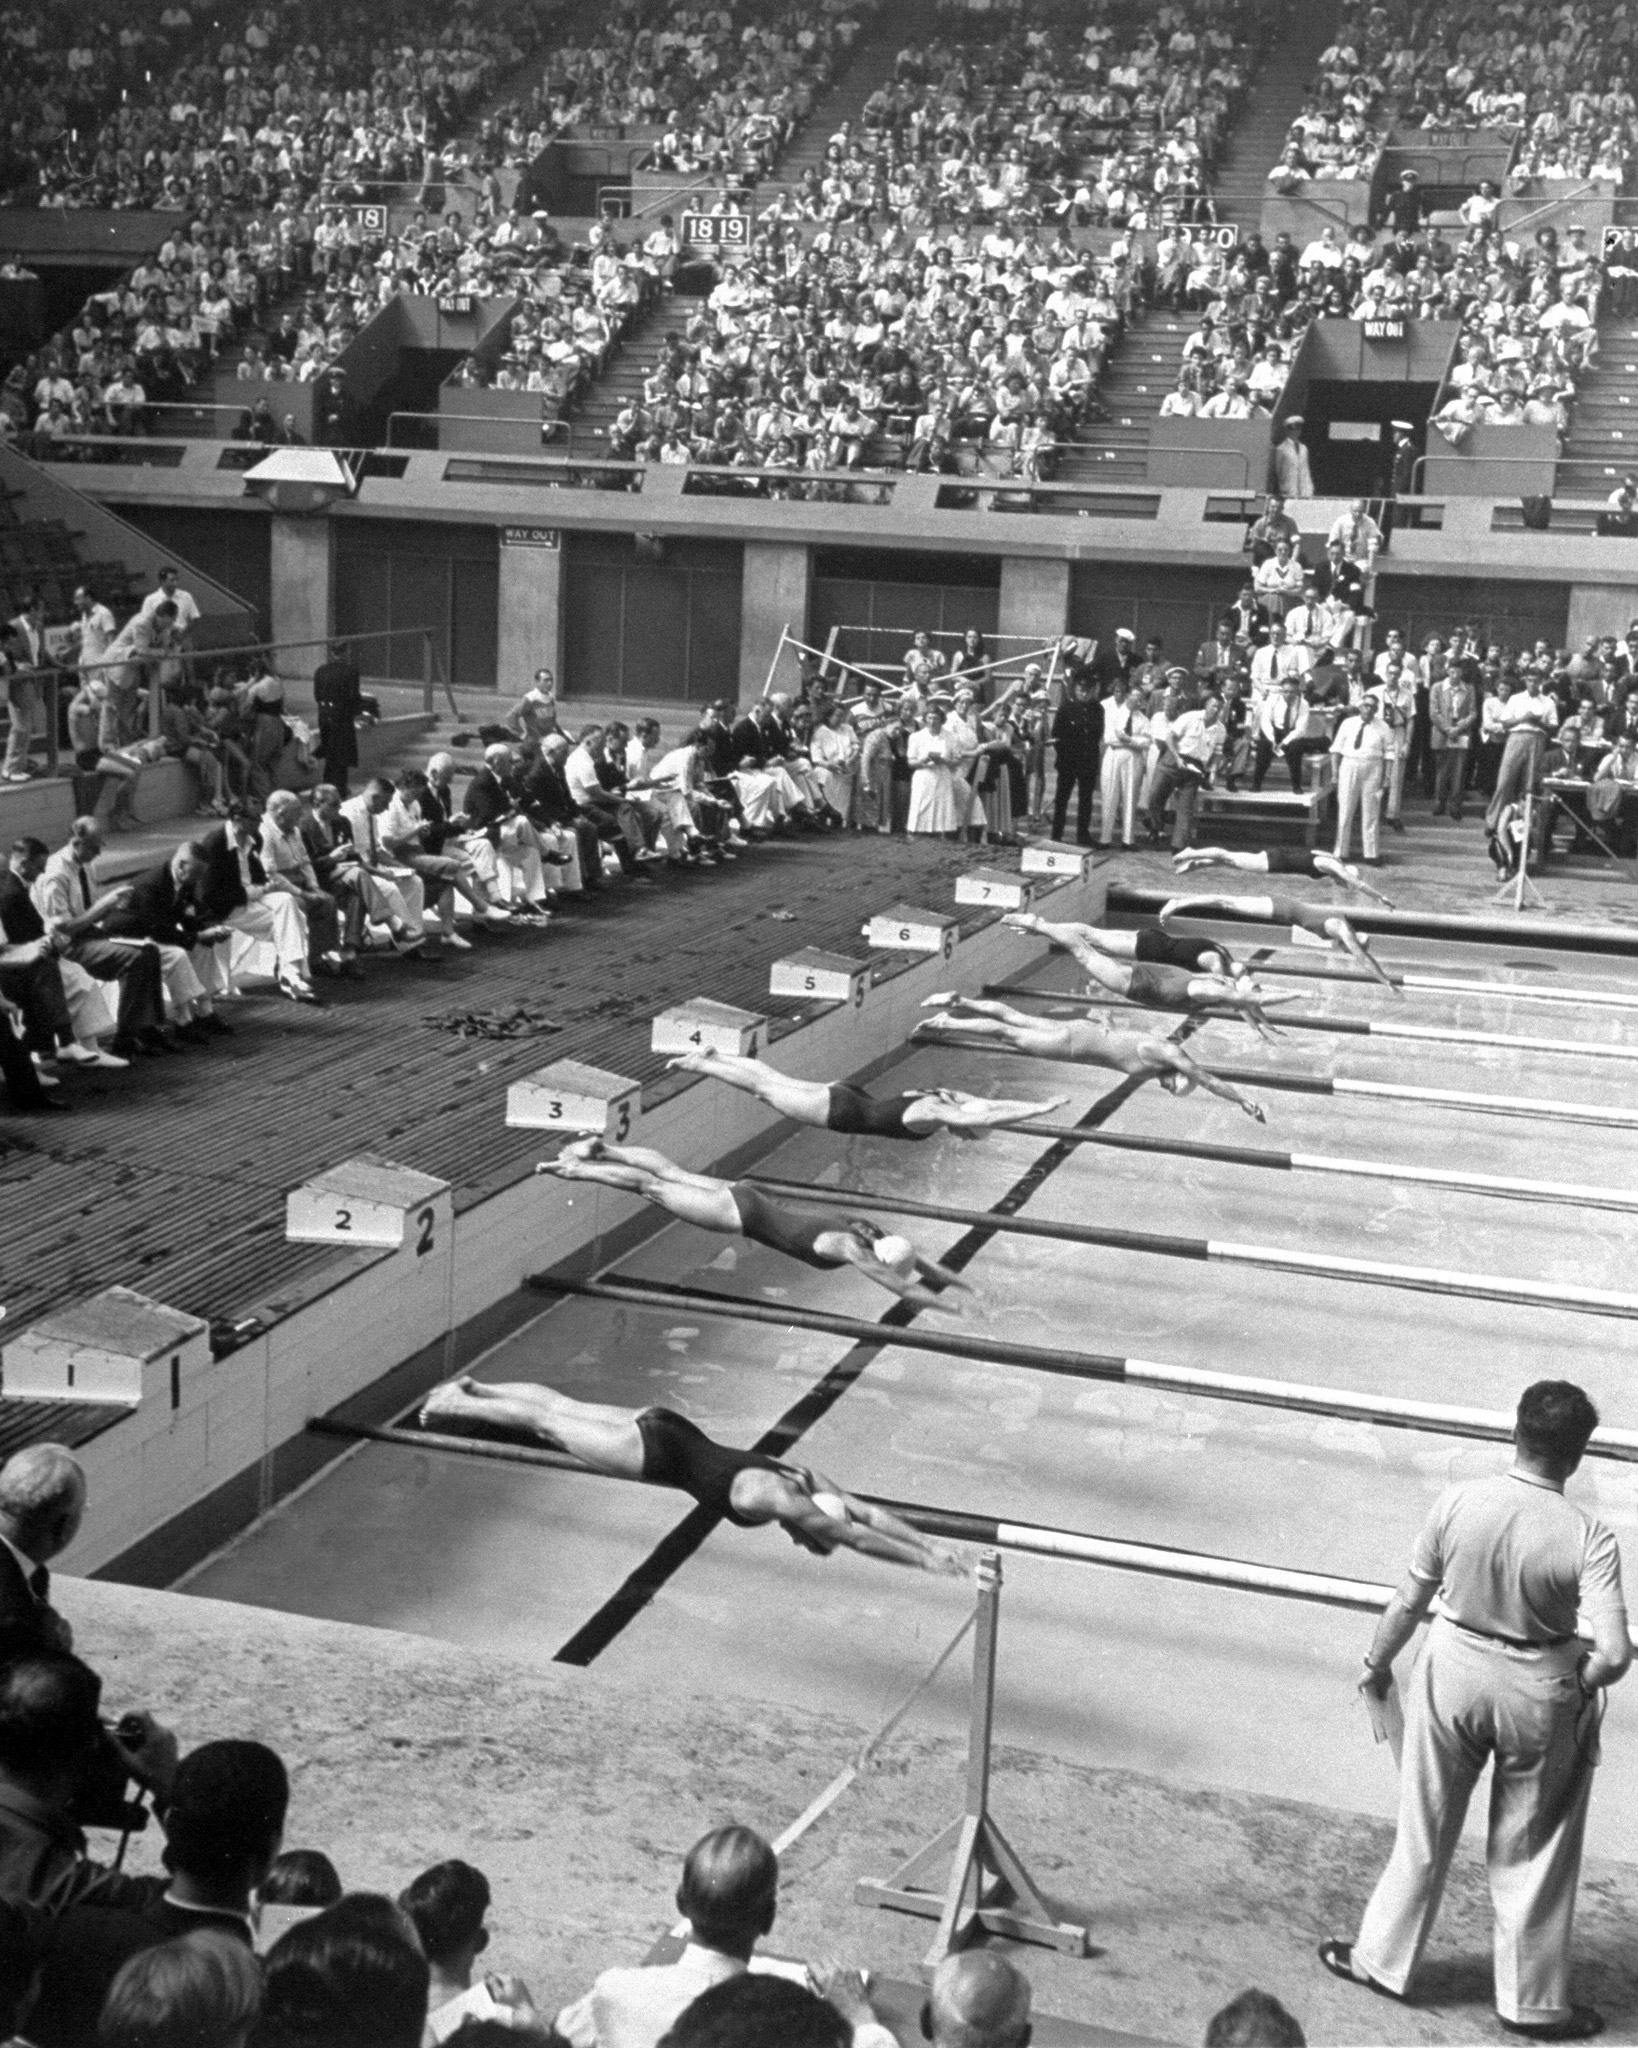 Competitors diving into pool during swimming events at the 1948 summer Olympics in London.